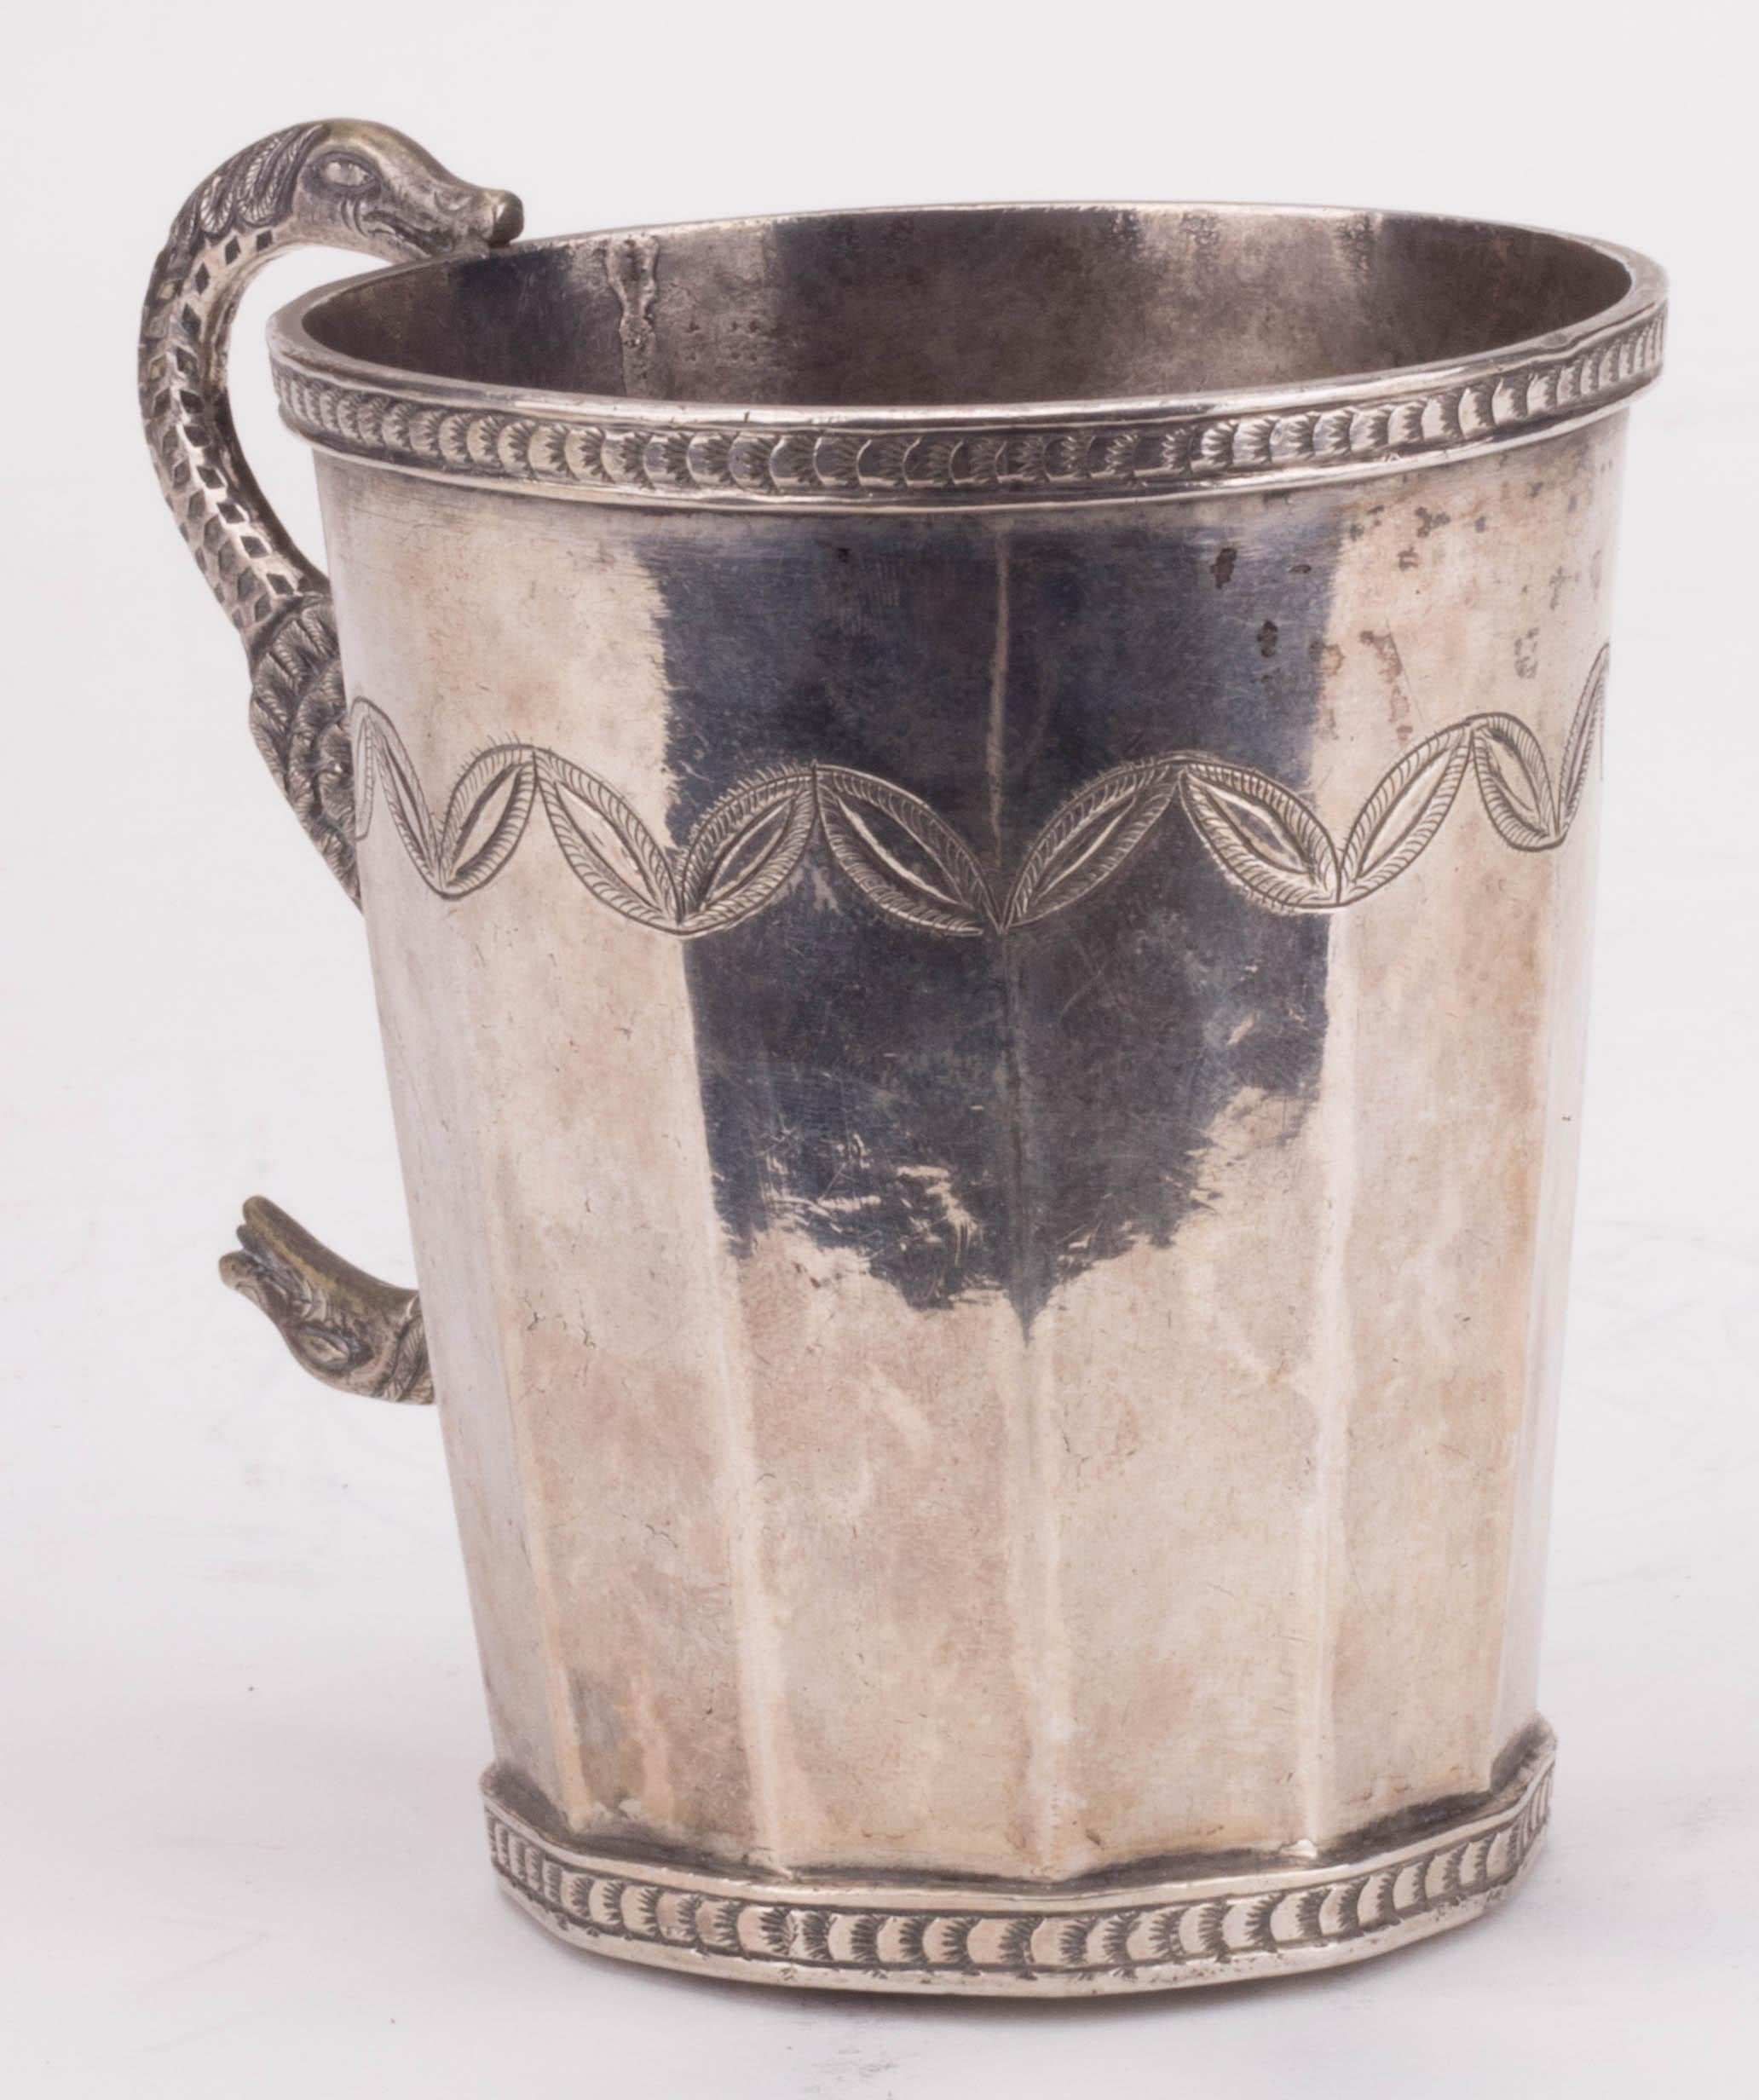 18th century probably Peruvian silver engraved jug with snake shaped handle. 

Silver by weight: 285 g.